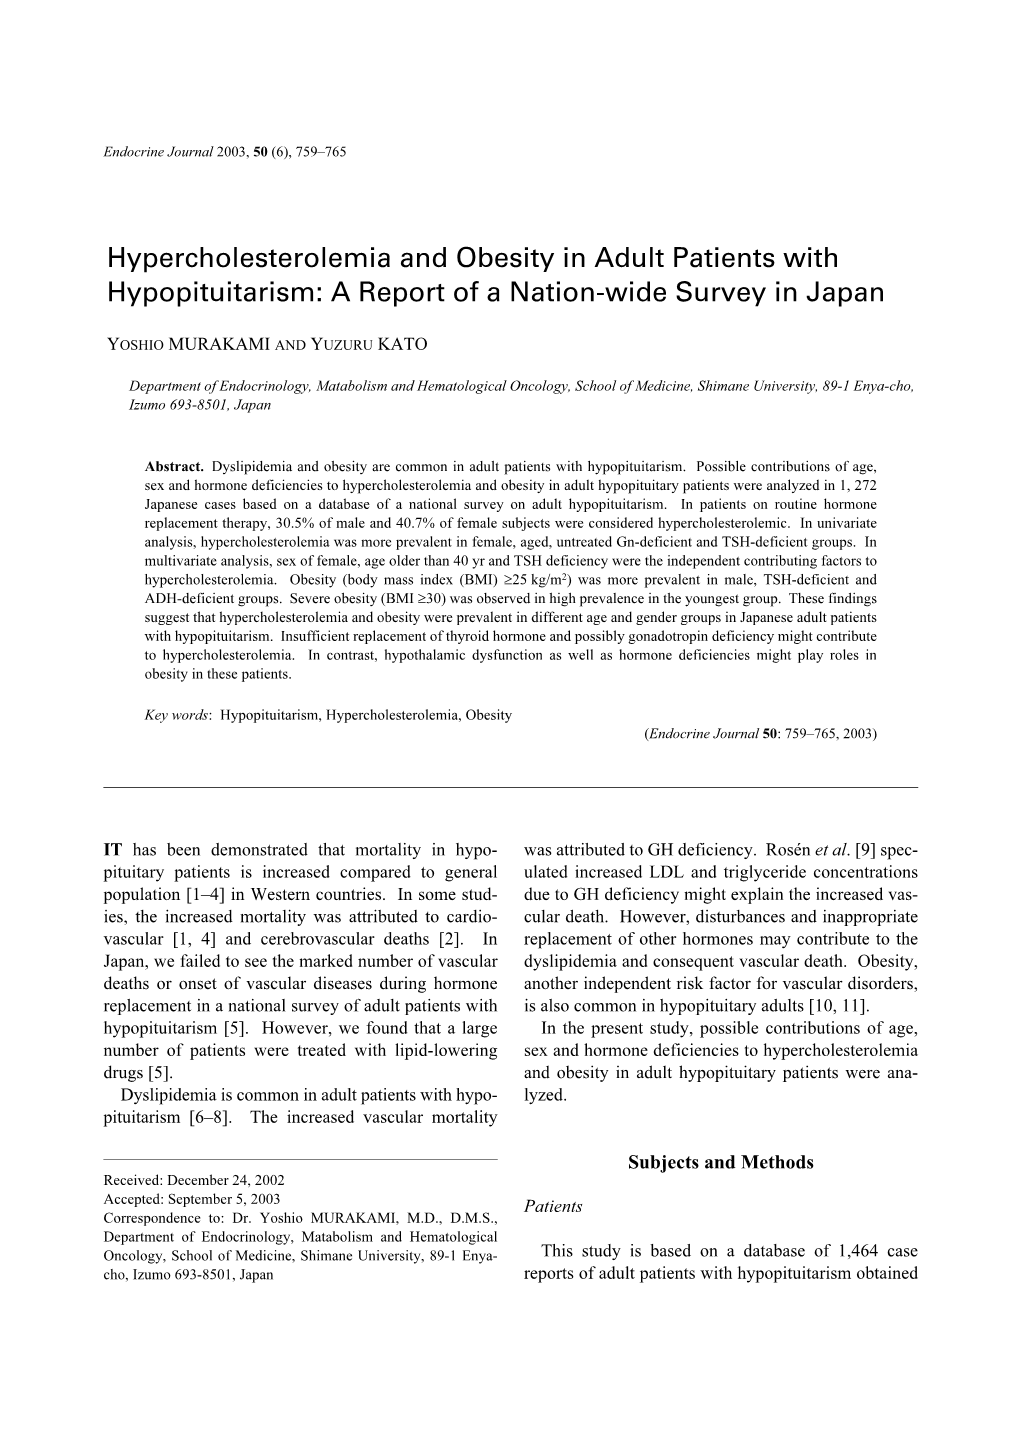 Hypercholesterolemia and Obesity in Adult Patients with Hypopituitarism: a Report of a Nation-Wide Survey in Japan